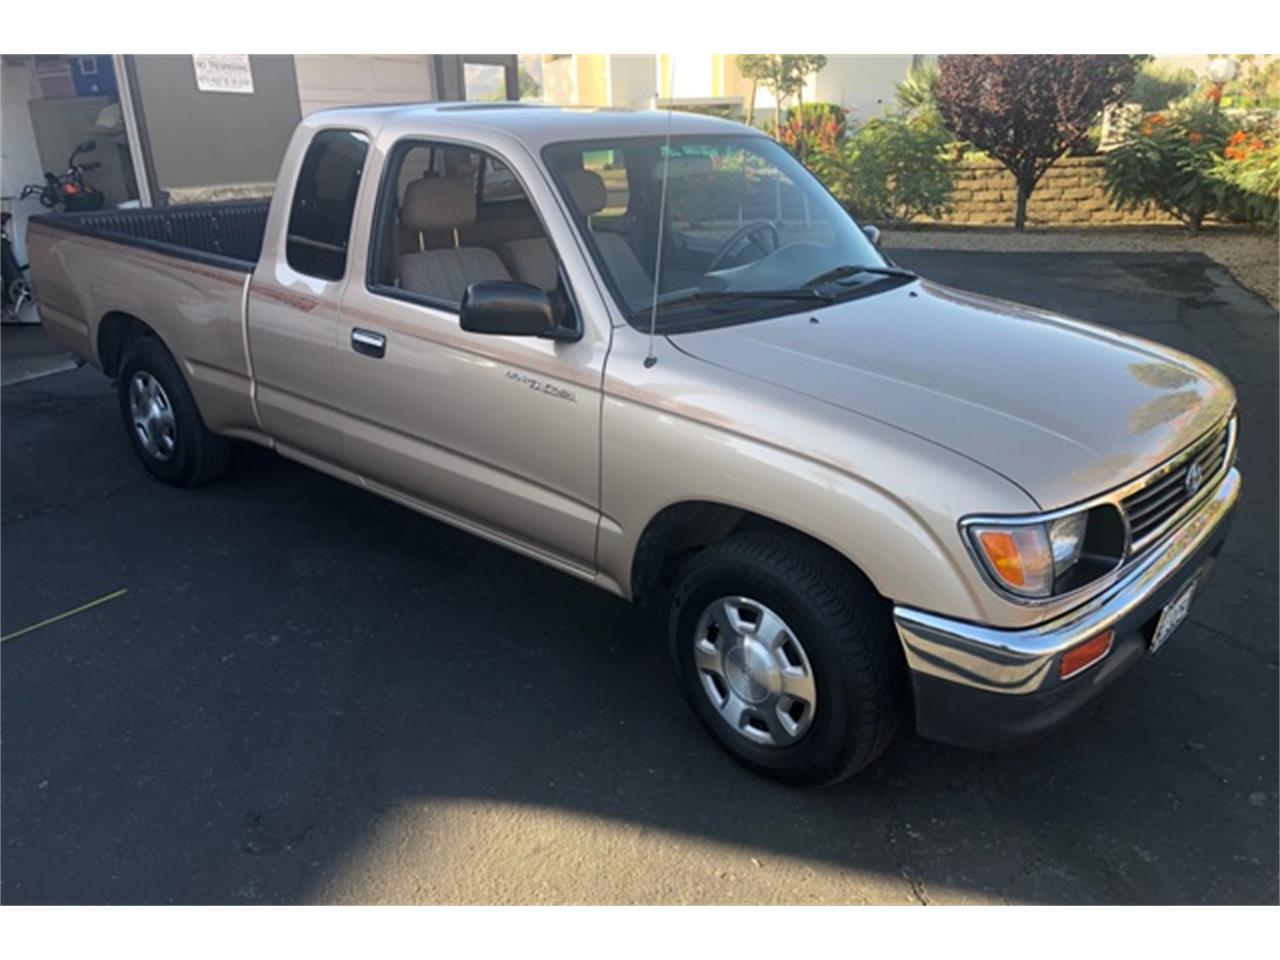 For Sale at Auction: 1996 Toyota Tacoma in Palm Springs, California for sale in Palm Springs, CA